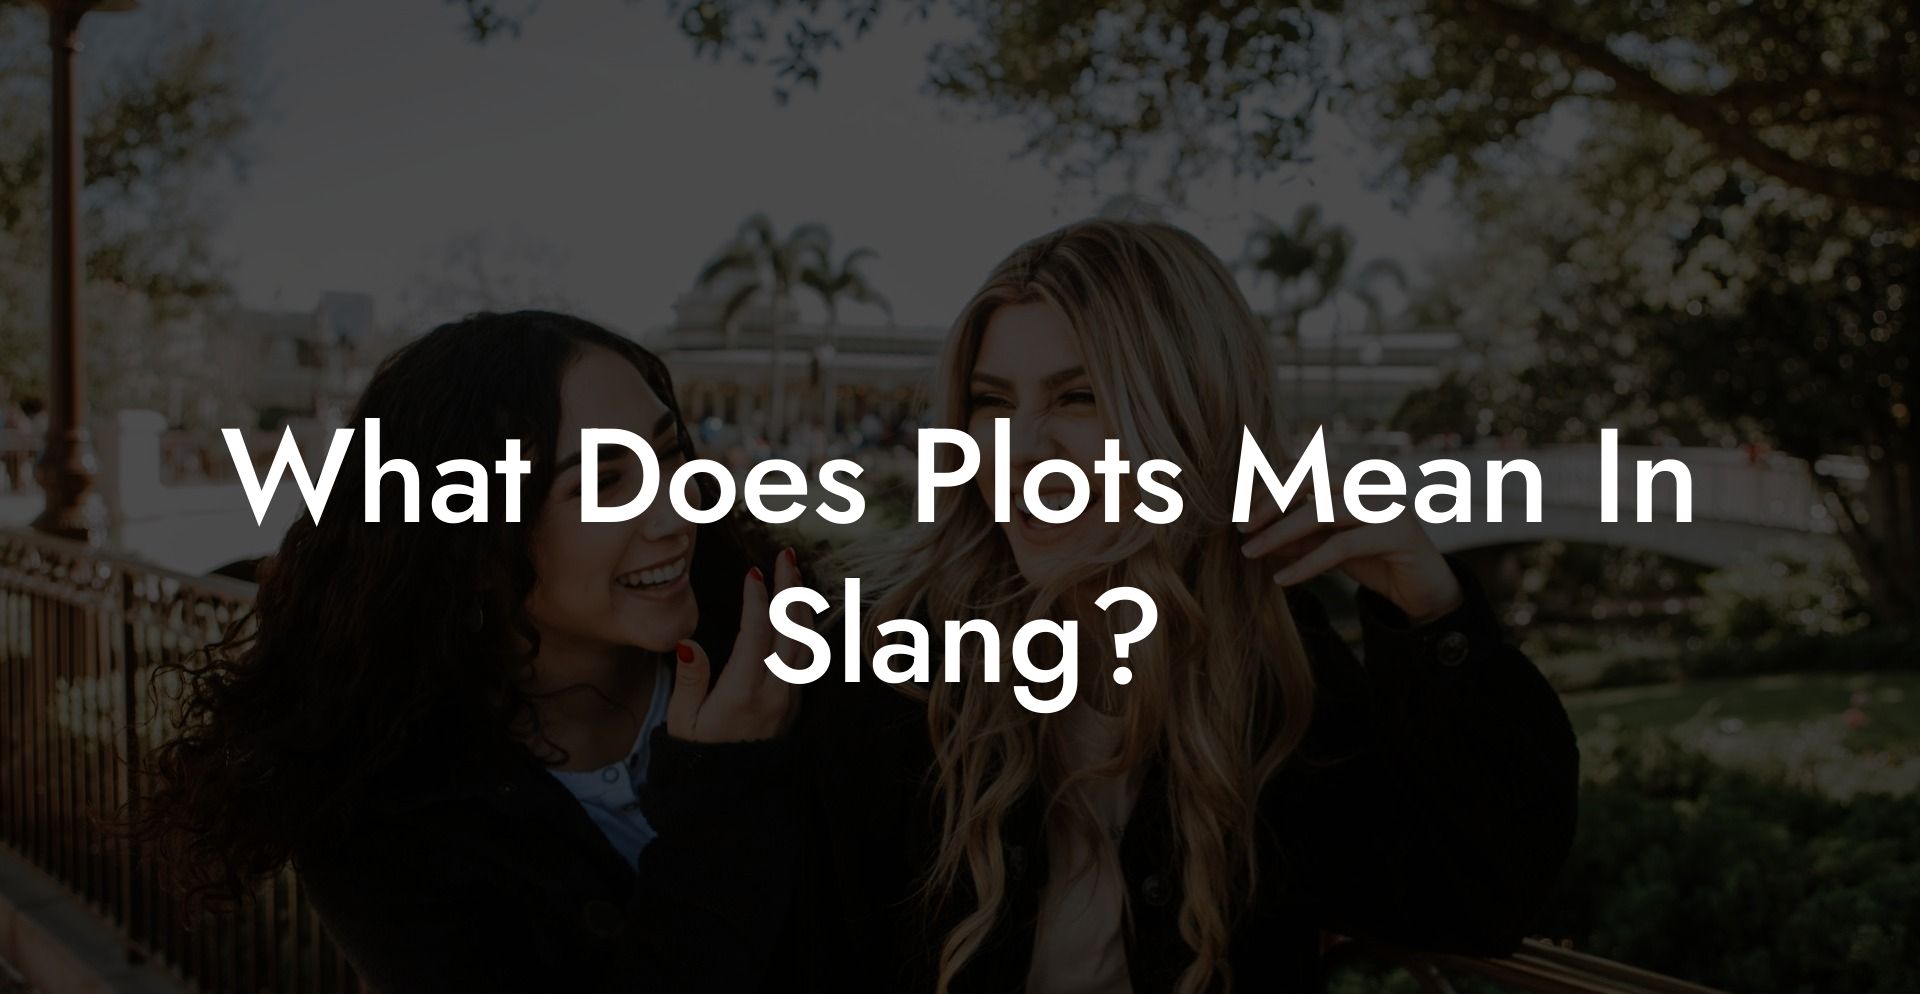 What Does Plots Mean In Slang?